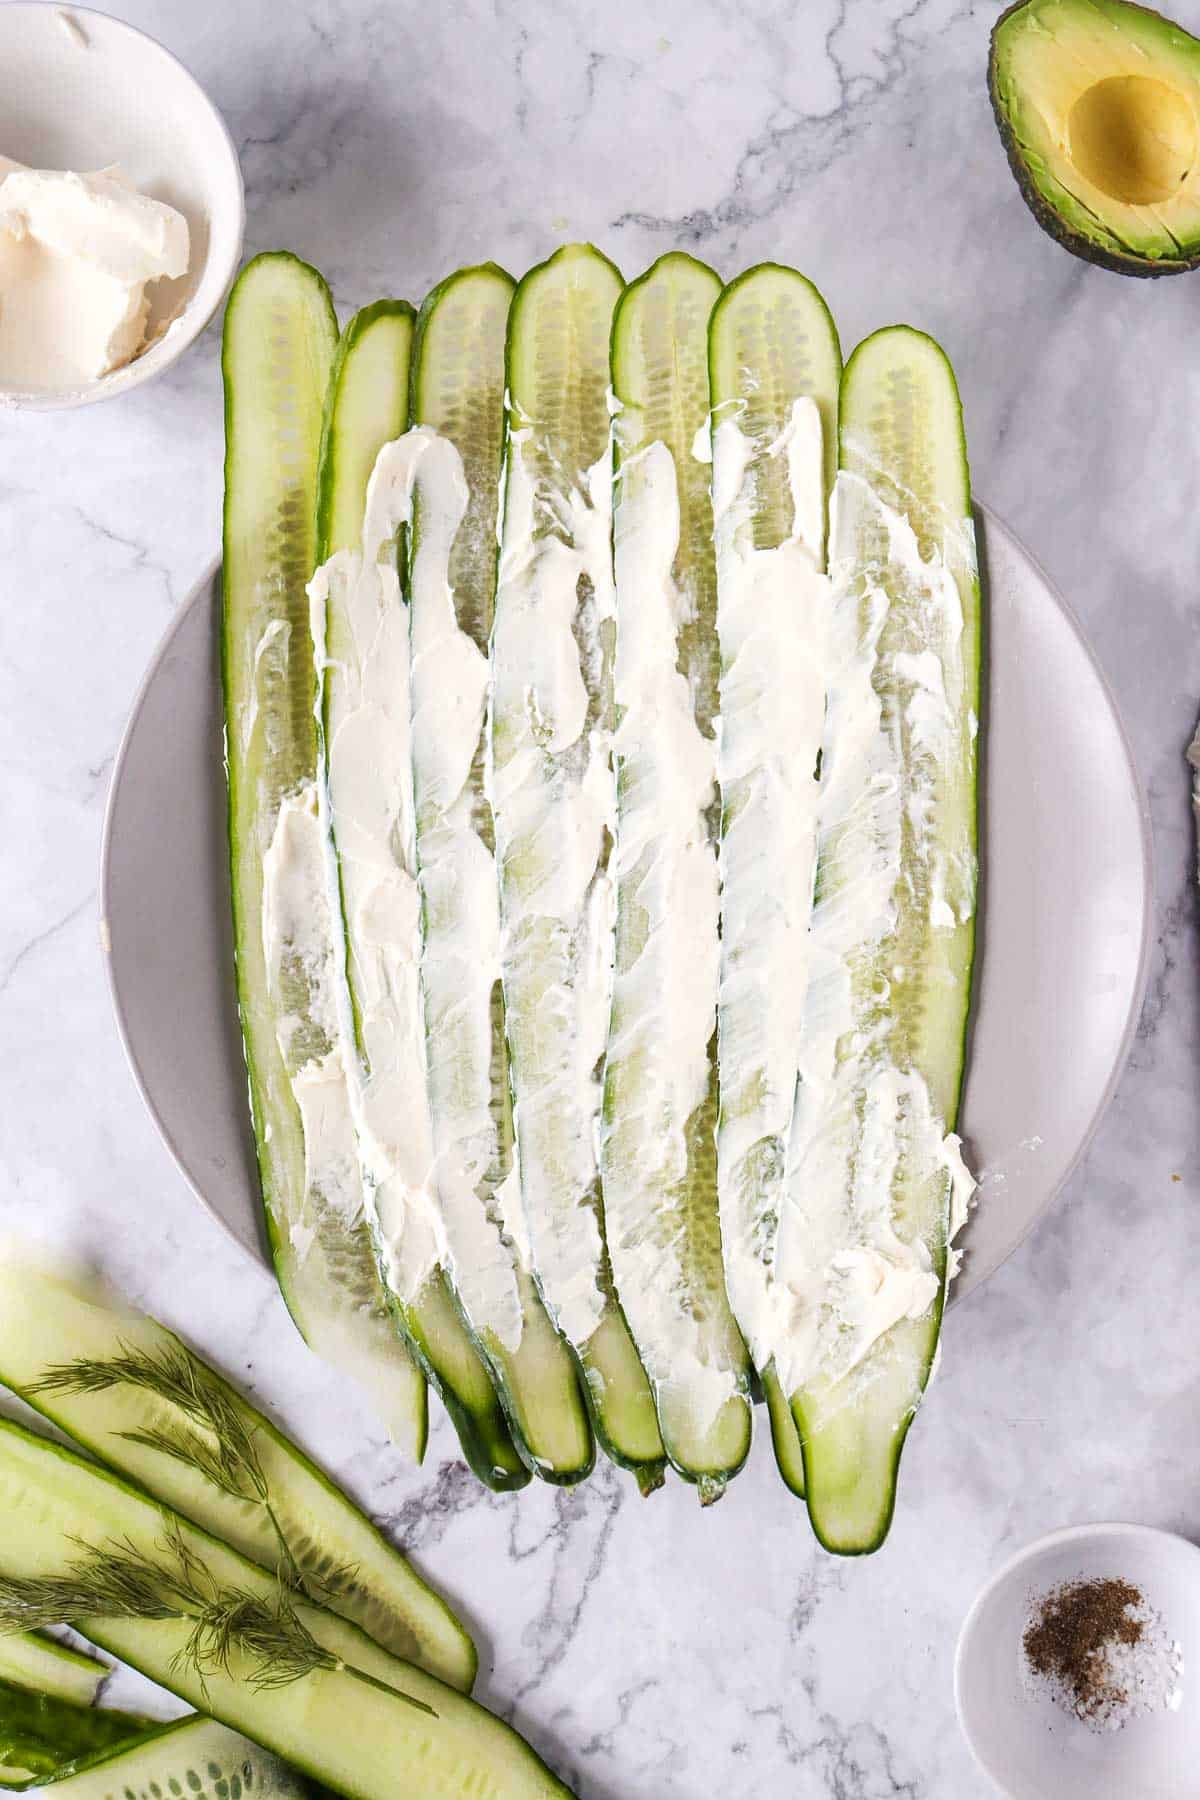 Thinly sliced cucumber lined up on a plate, topped with cream cheese, surrounded by ingredients like avocado, and seasonings.